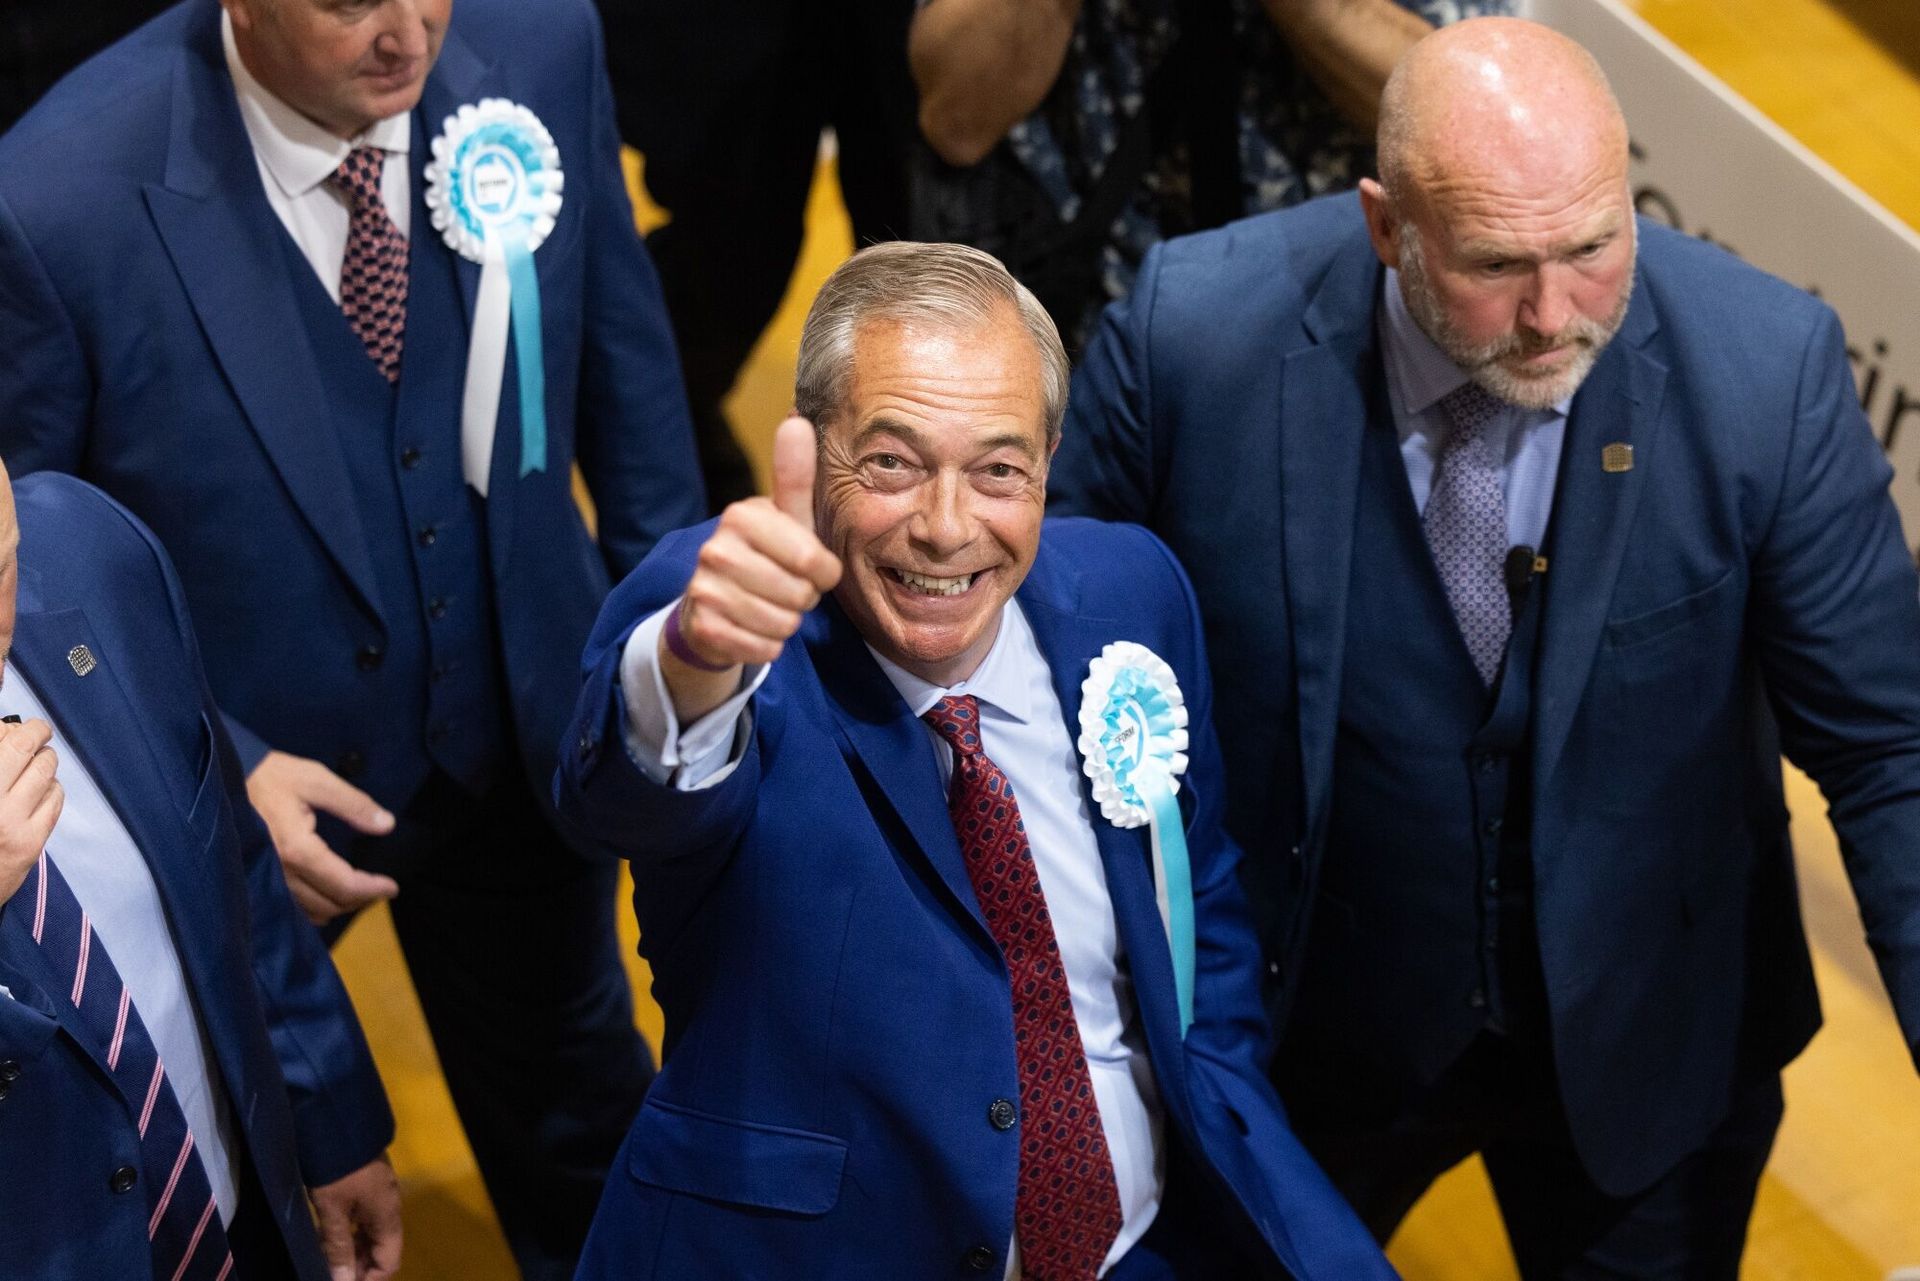 Nigel Farage, leader of Reform UK, won a seat in Parliament for the first time.